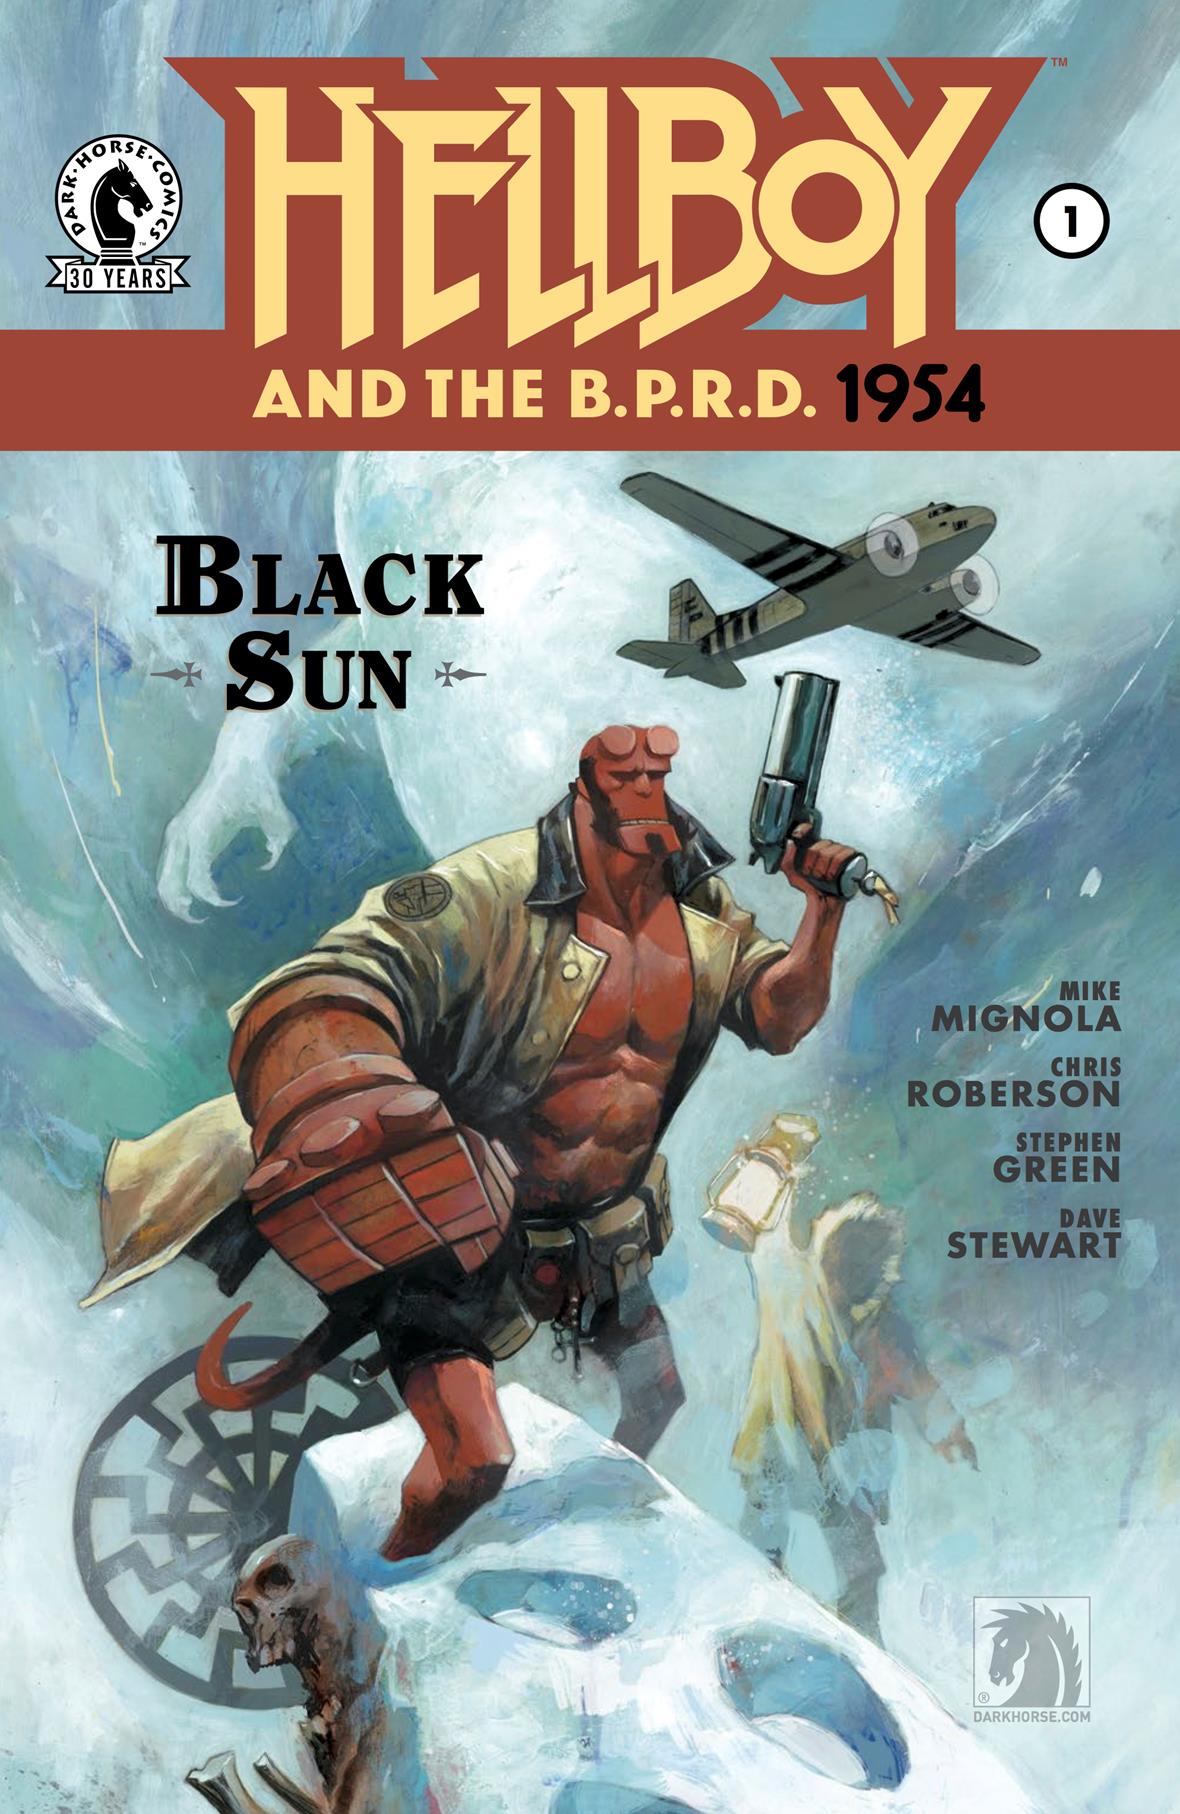 Hellboy and the B.P.R.D.: 1954 -- The Black Sun #1